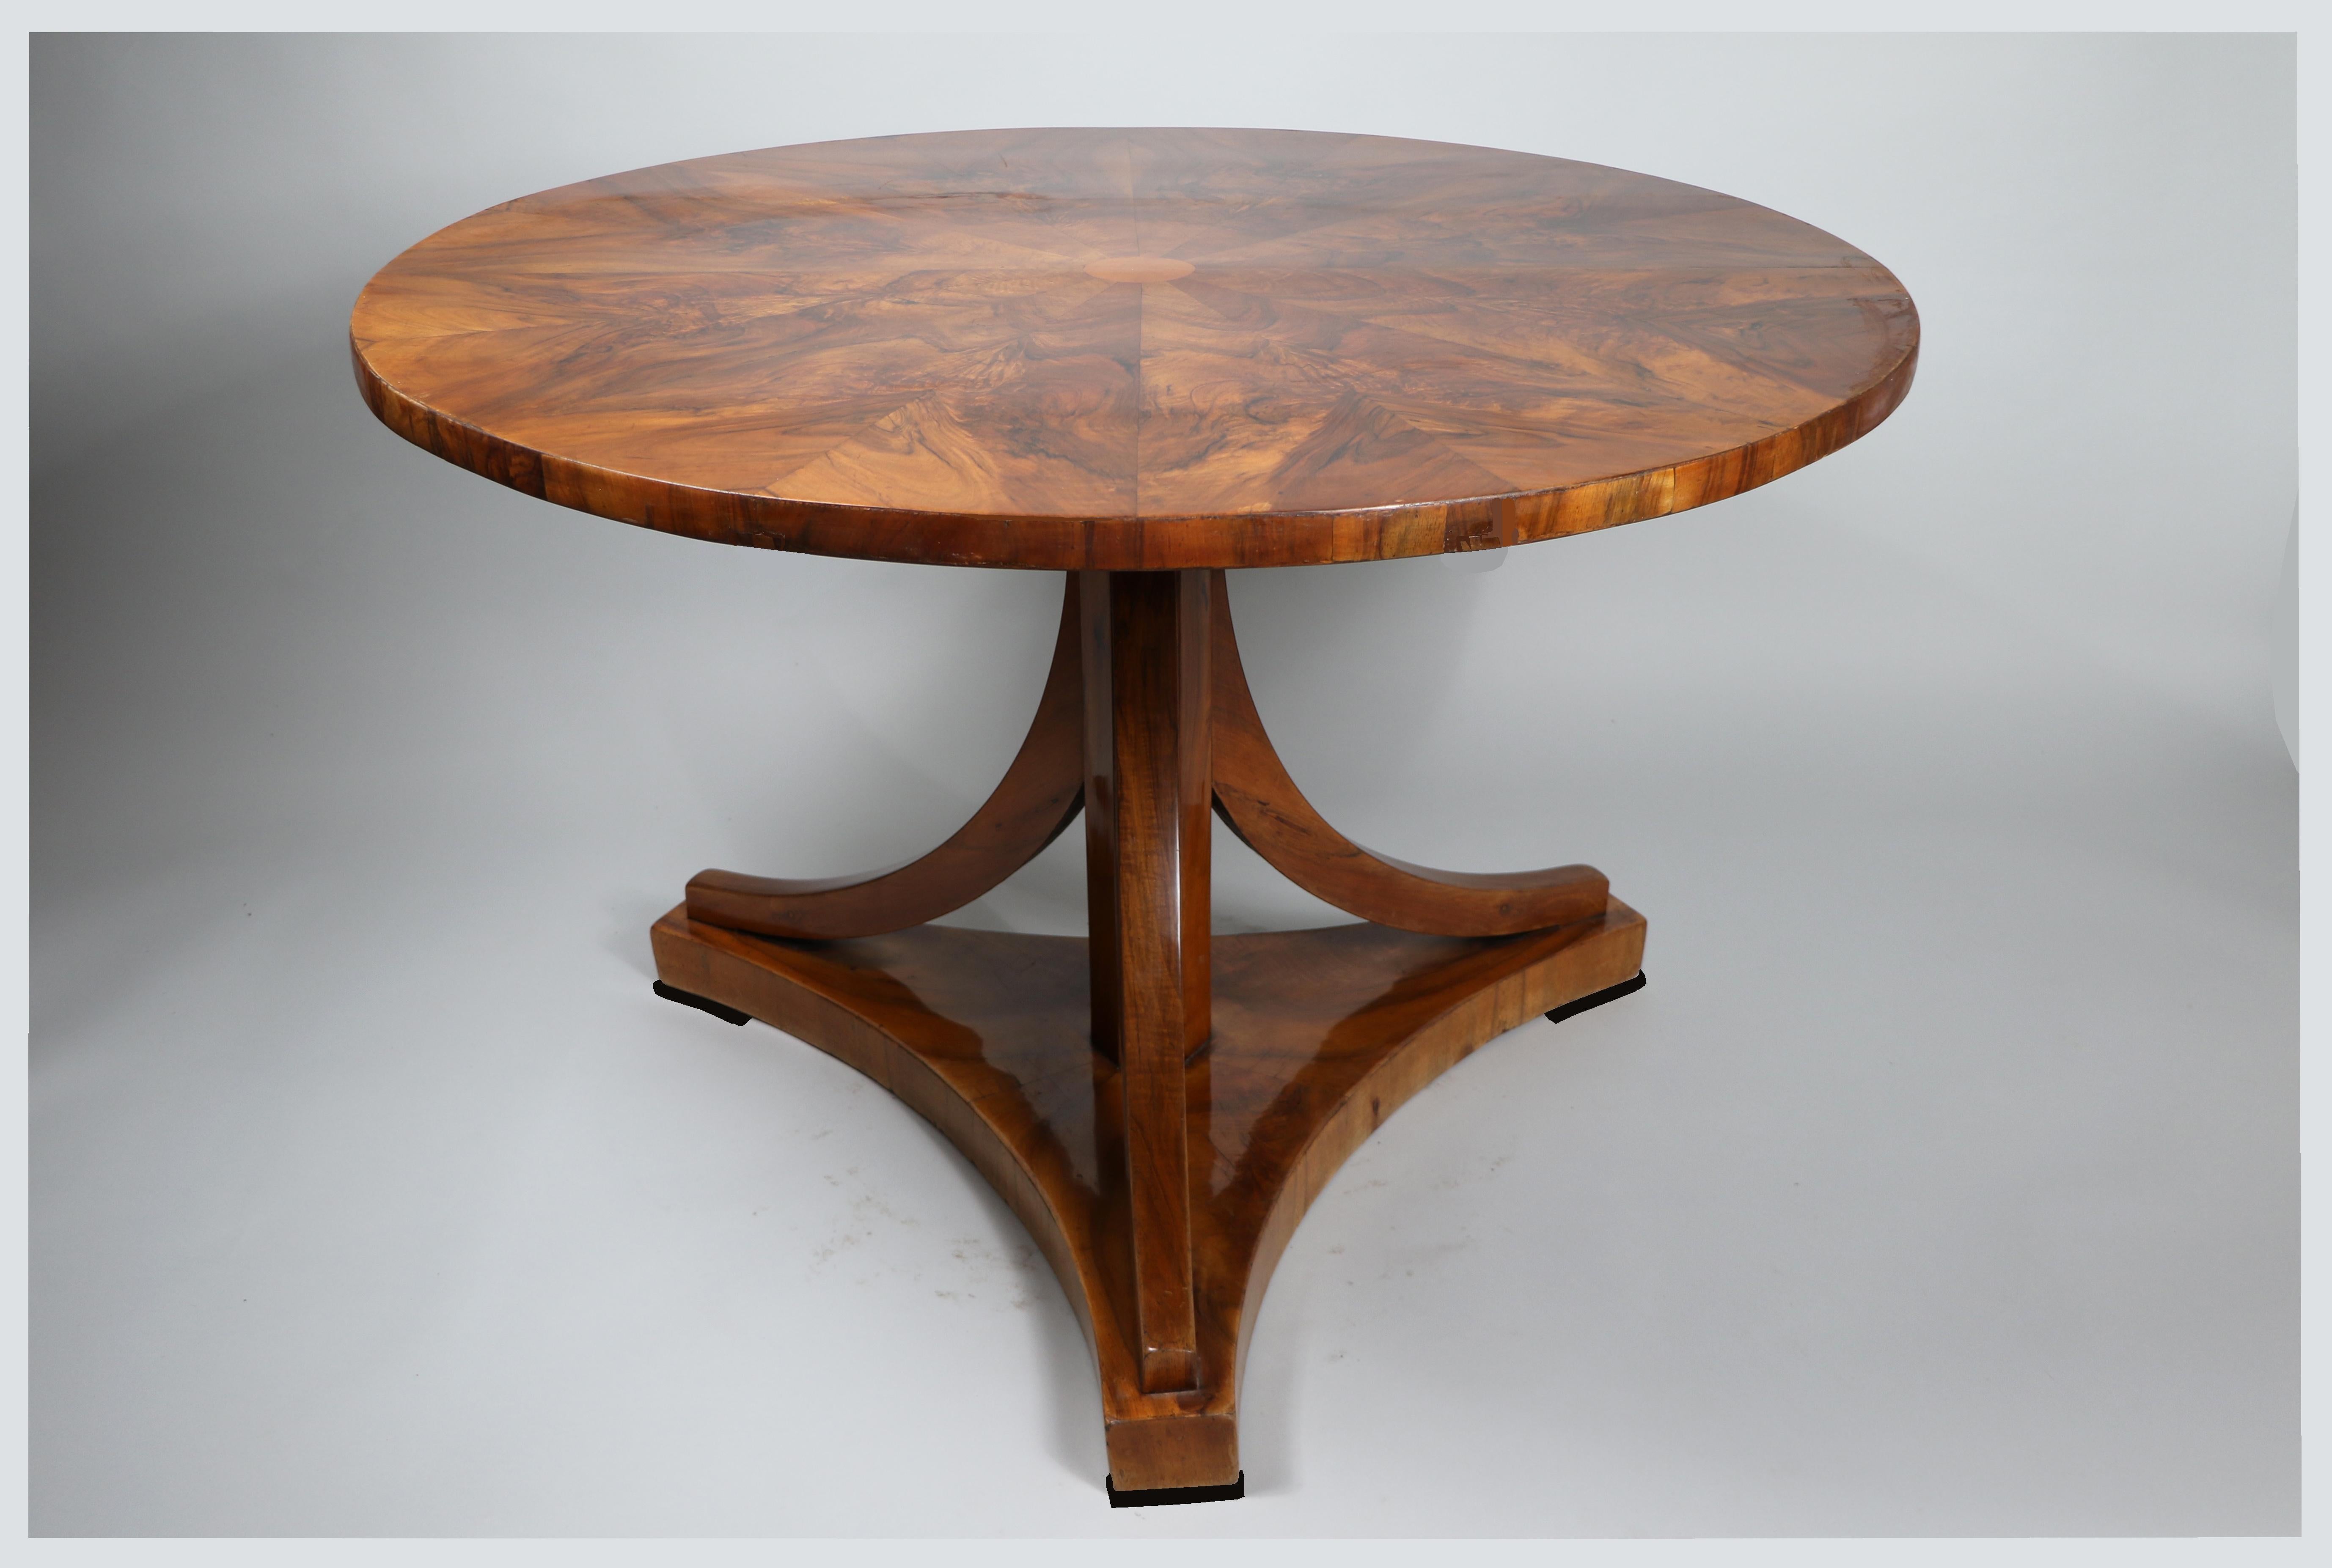 Hello,

This fine Biedermeier walnut table was made in Vienna circa 1825.

Viennese Biedermeier pieces are distinguished by their sophisticated proportions, rare and refined design, excellent craftsmanship and continue to have a great influence on